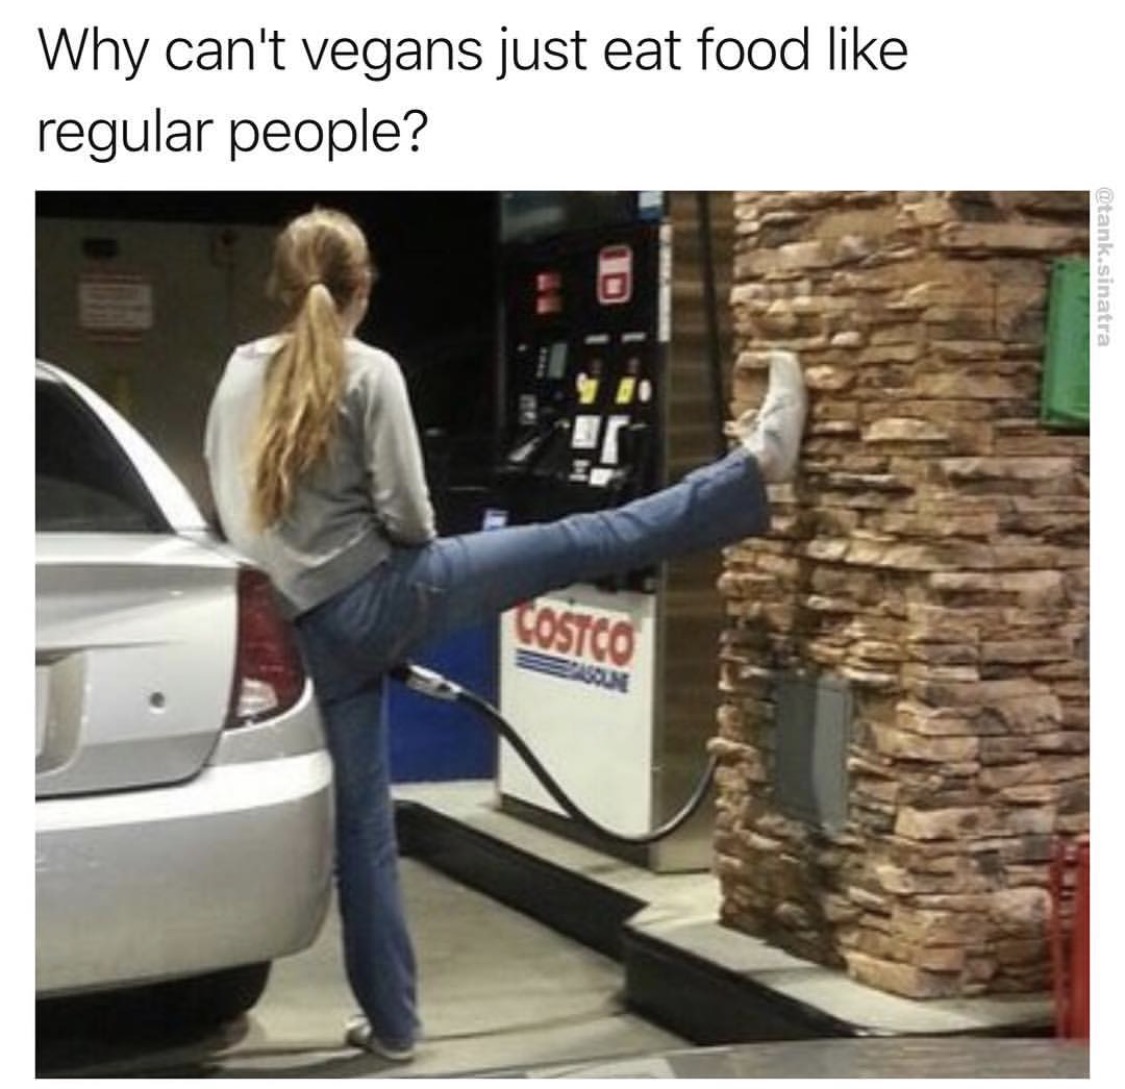 fill er up meme - Why can't vegans just eat food regular people? .sinatra Costco